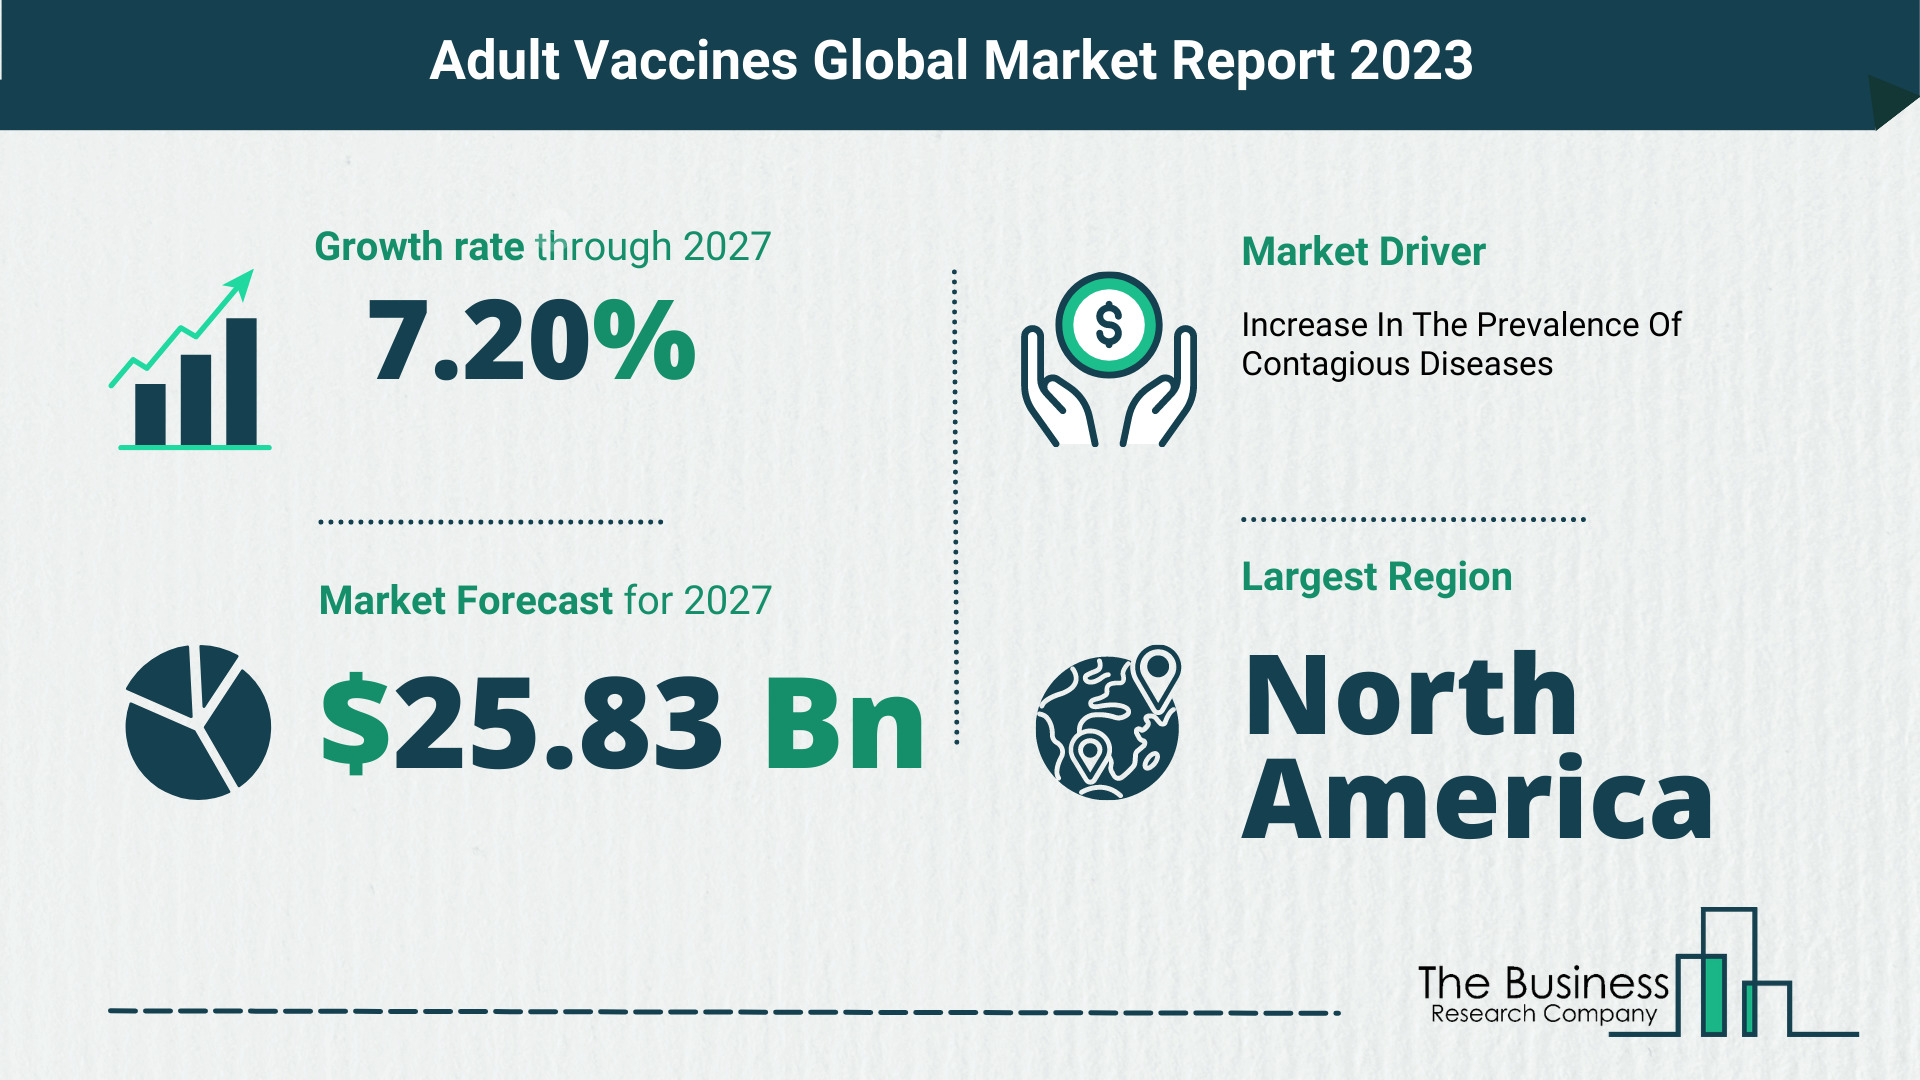 Global Adult Vaccines Market Opportunities And Strategies 2023